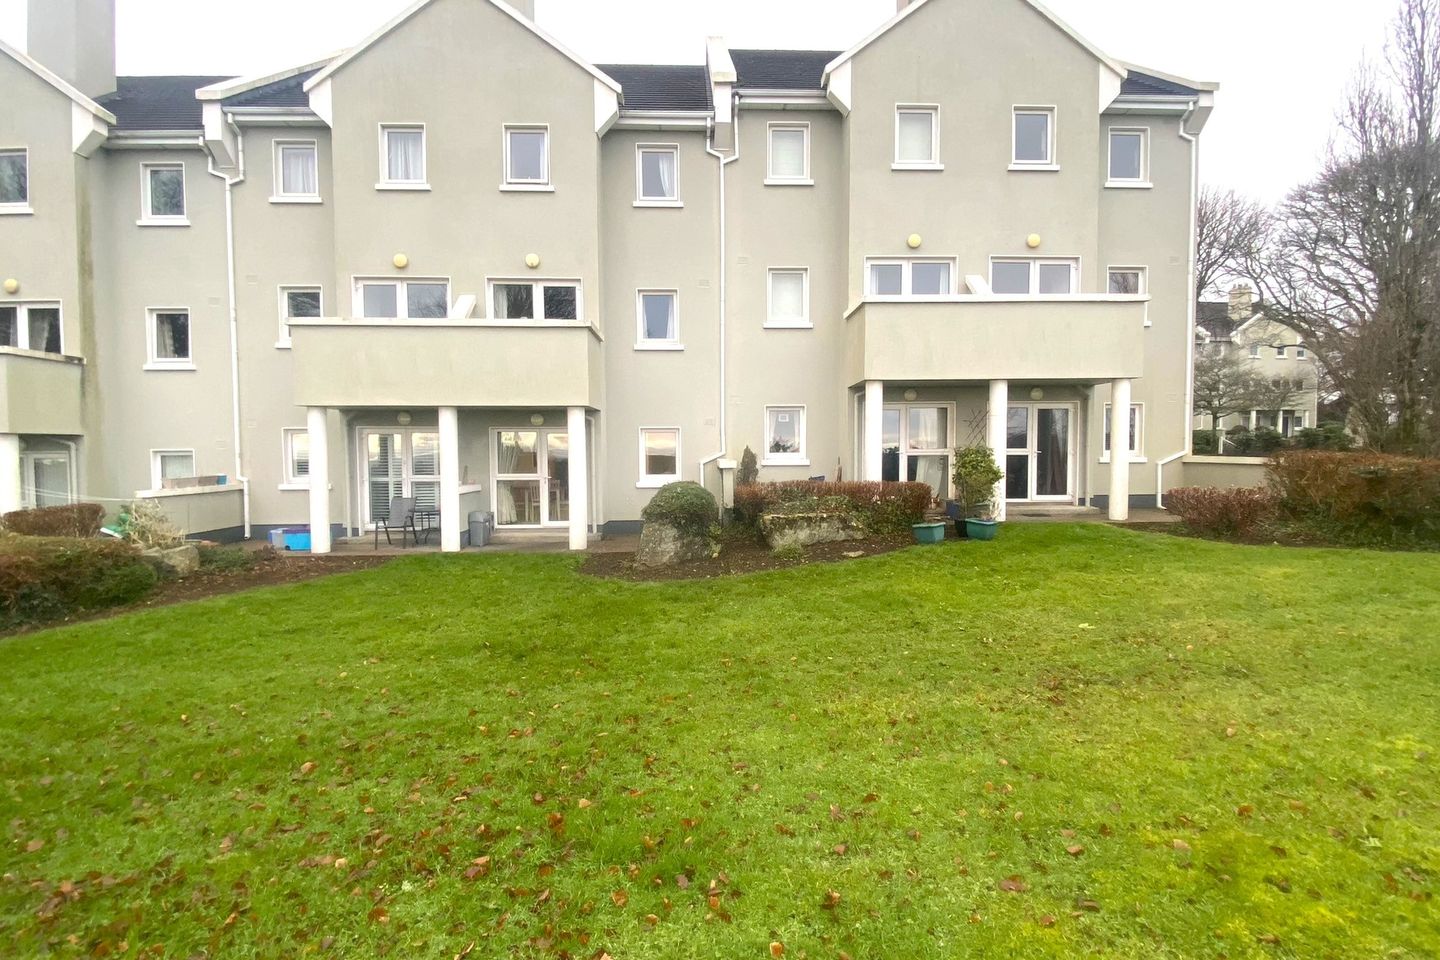 Apartment 4, Cuan Na Coille, Kingston, Co. Galway